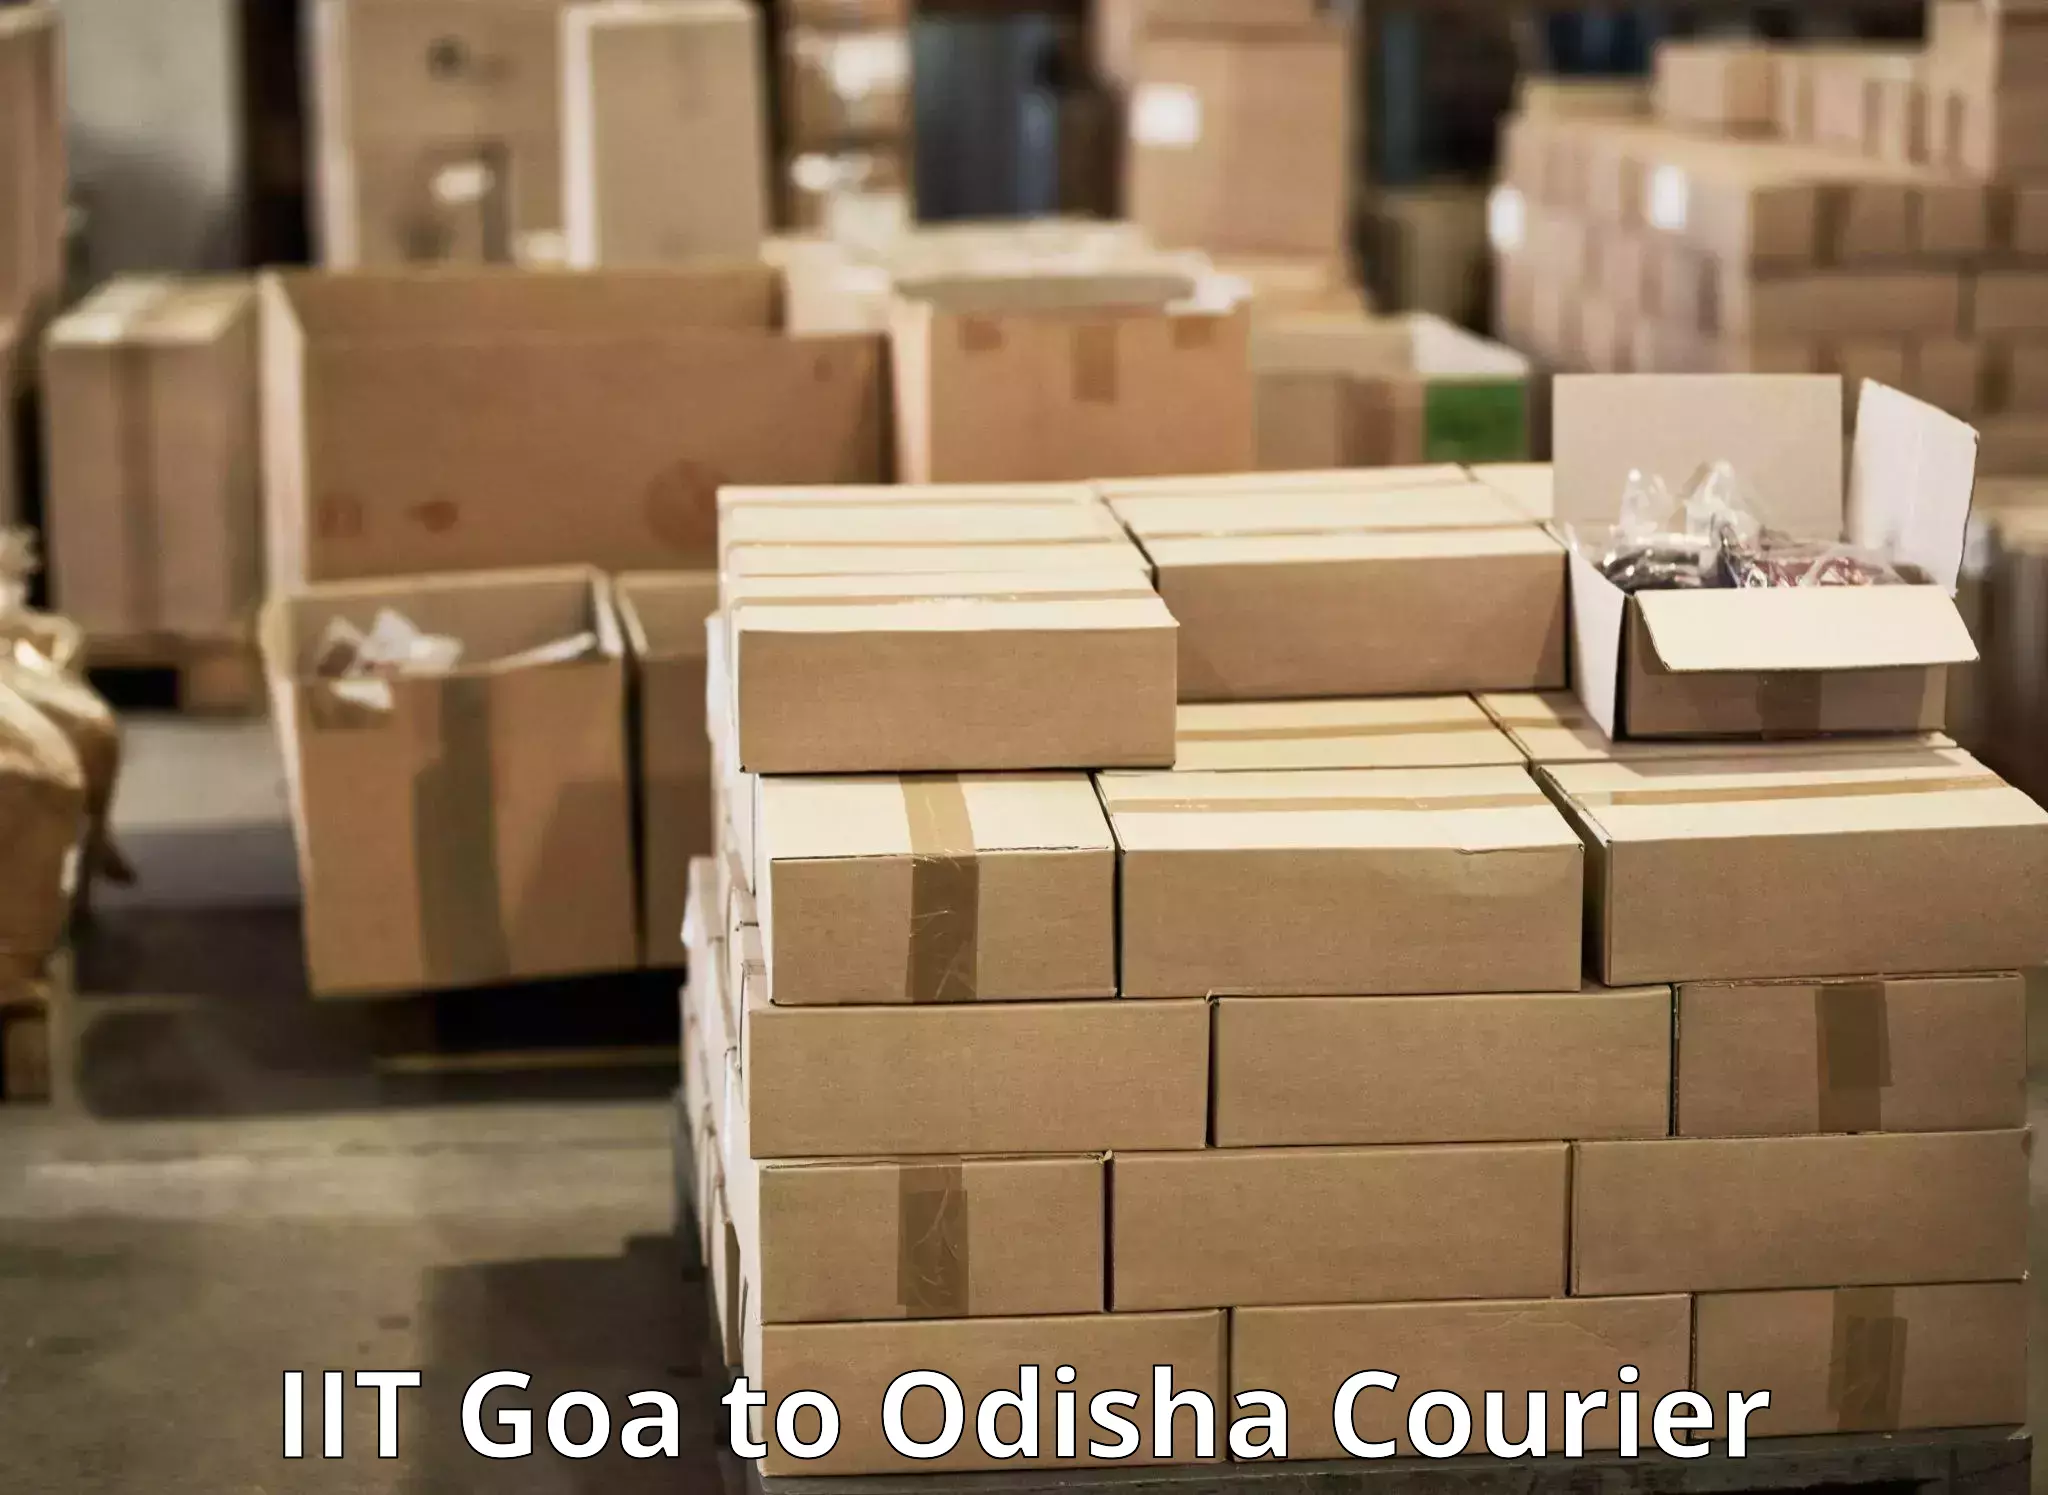 Bulk courier orders IIT Goa to Cuttack